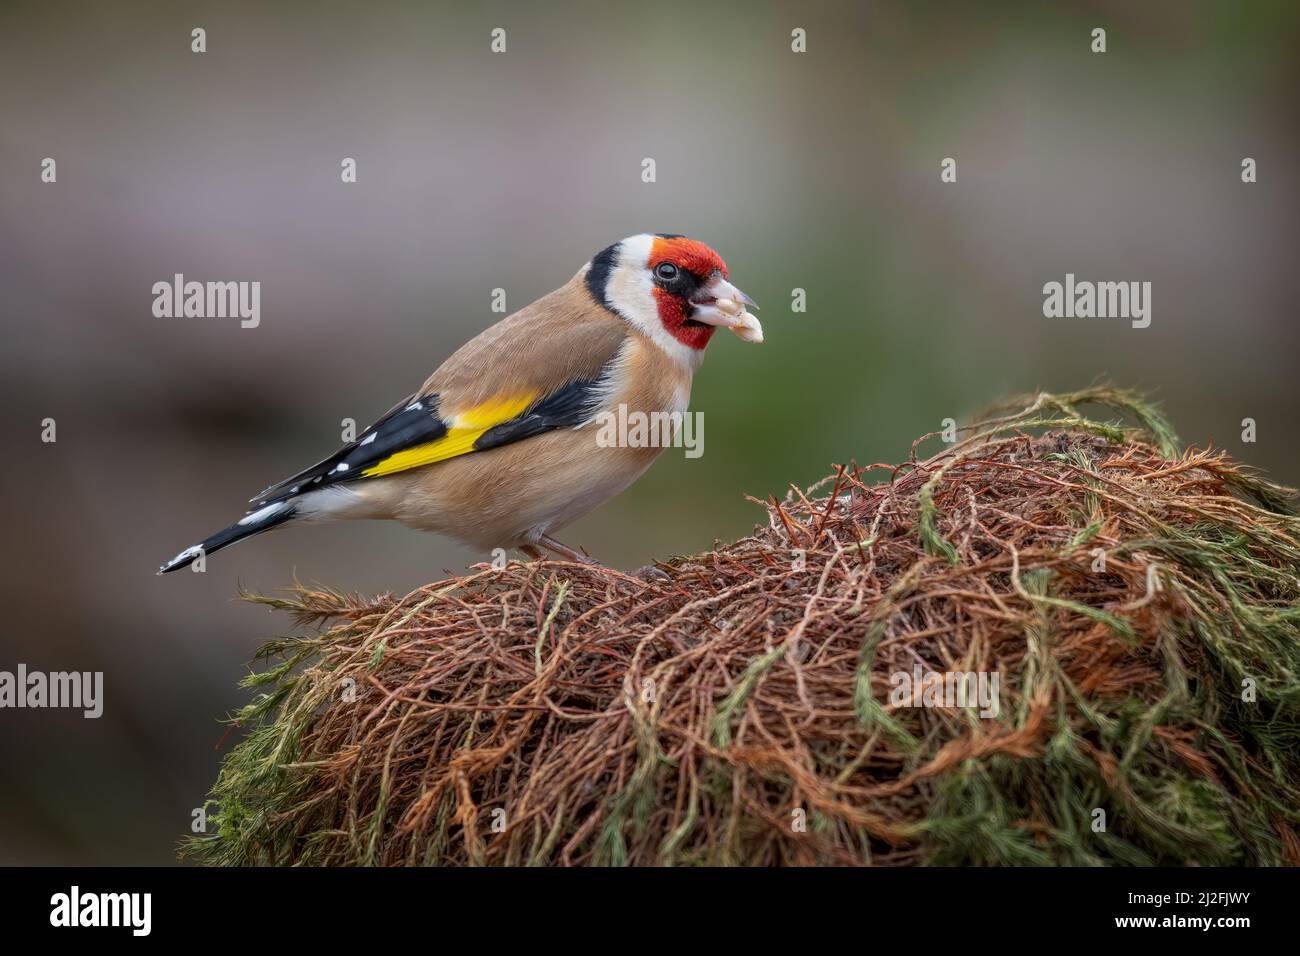 A portrait of a goldfinch, carduelis, as it perches on an old grass mound Stock Photo